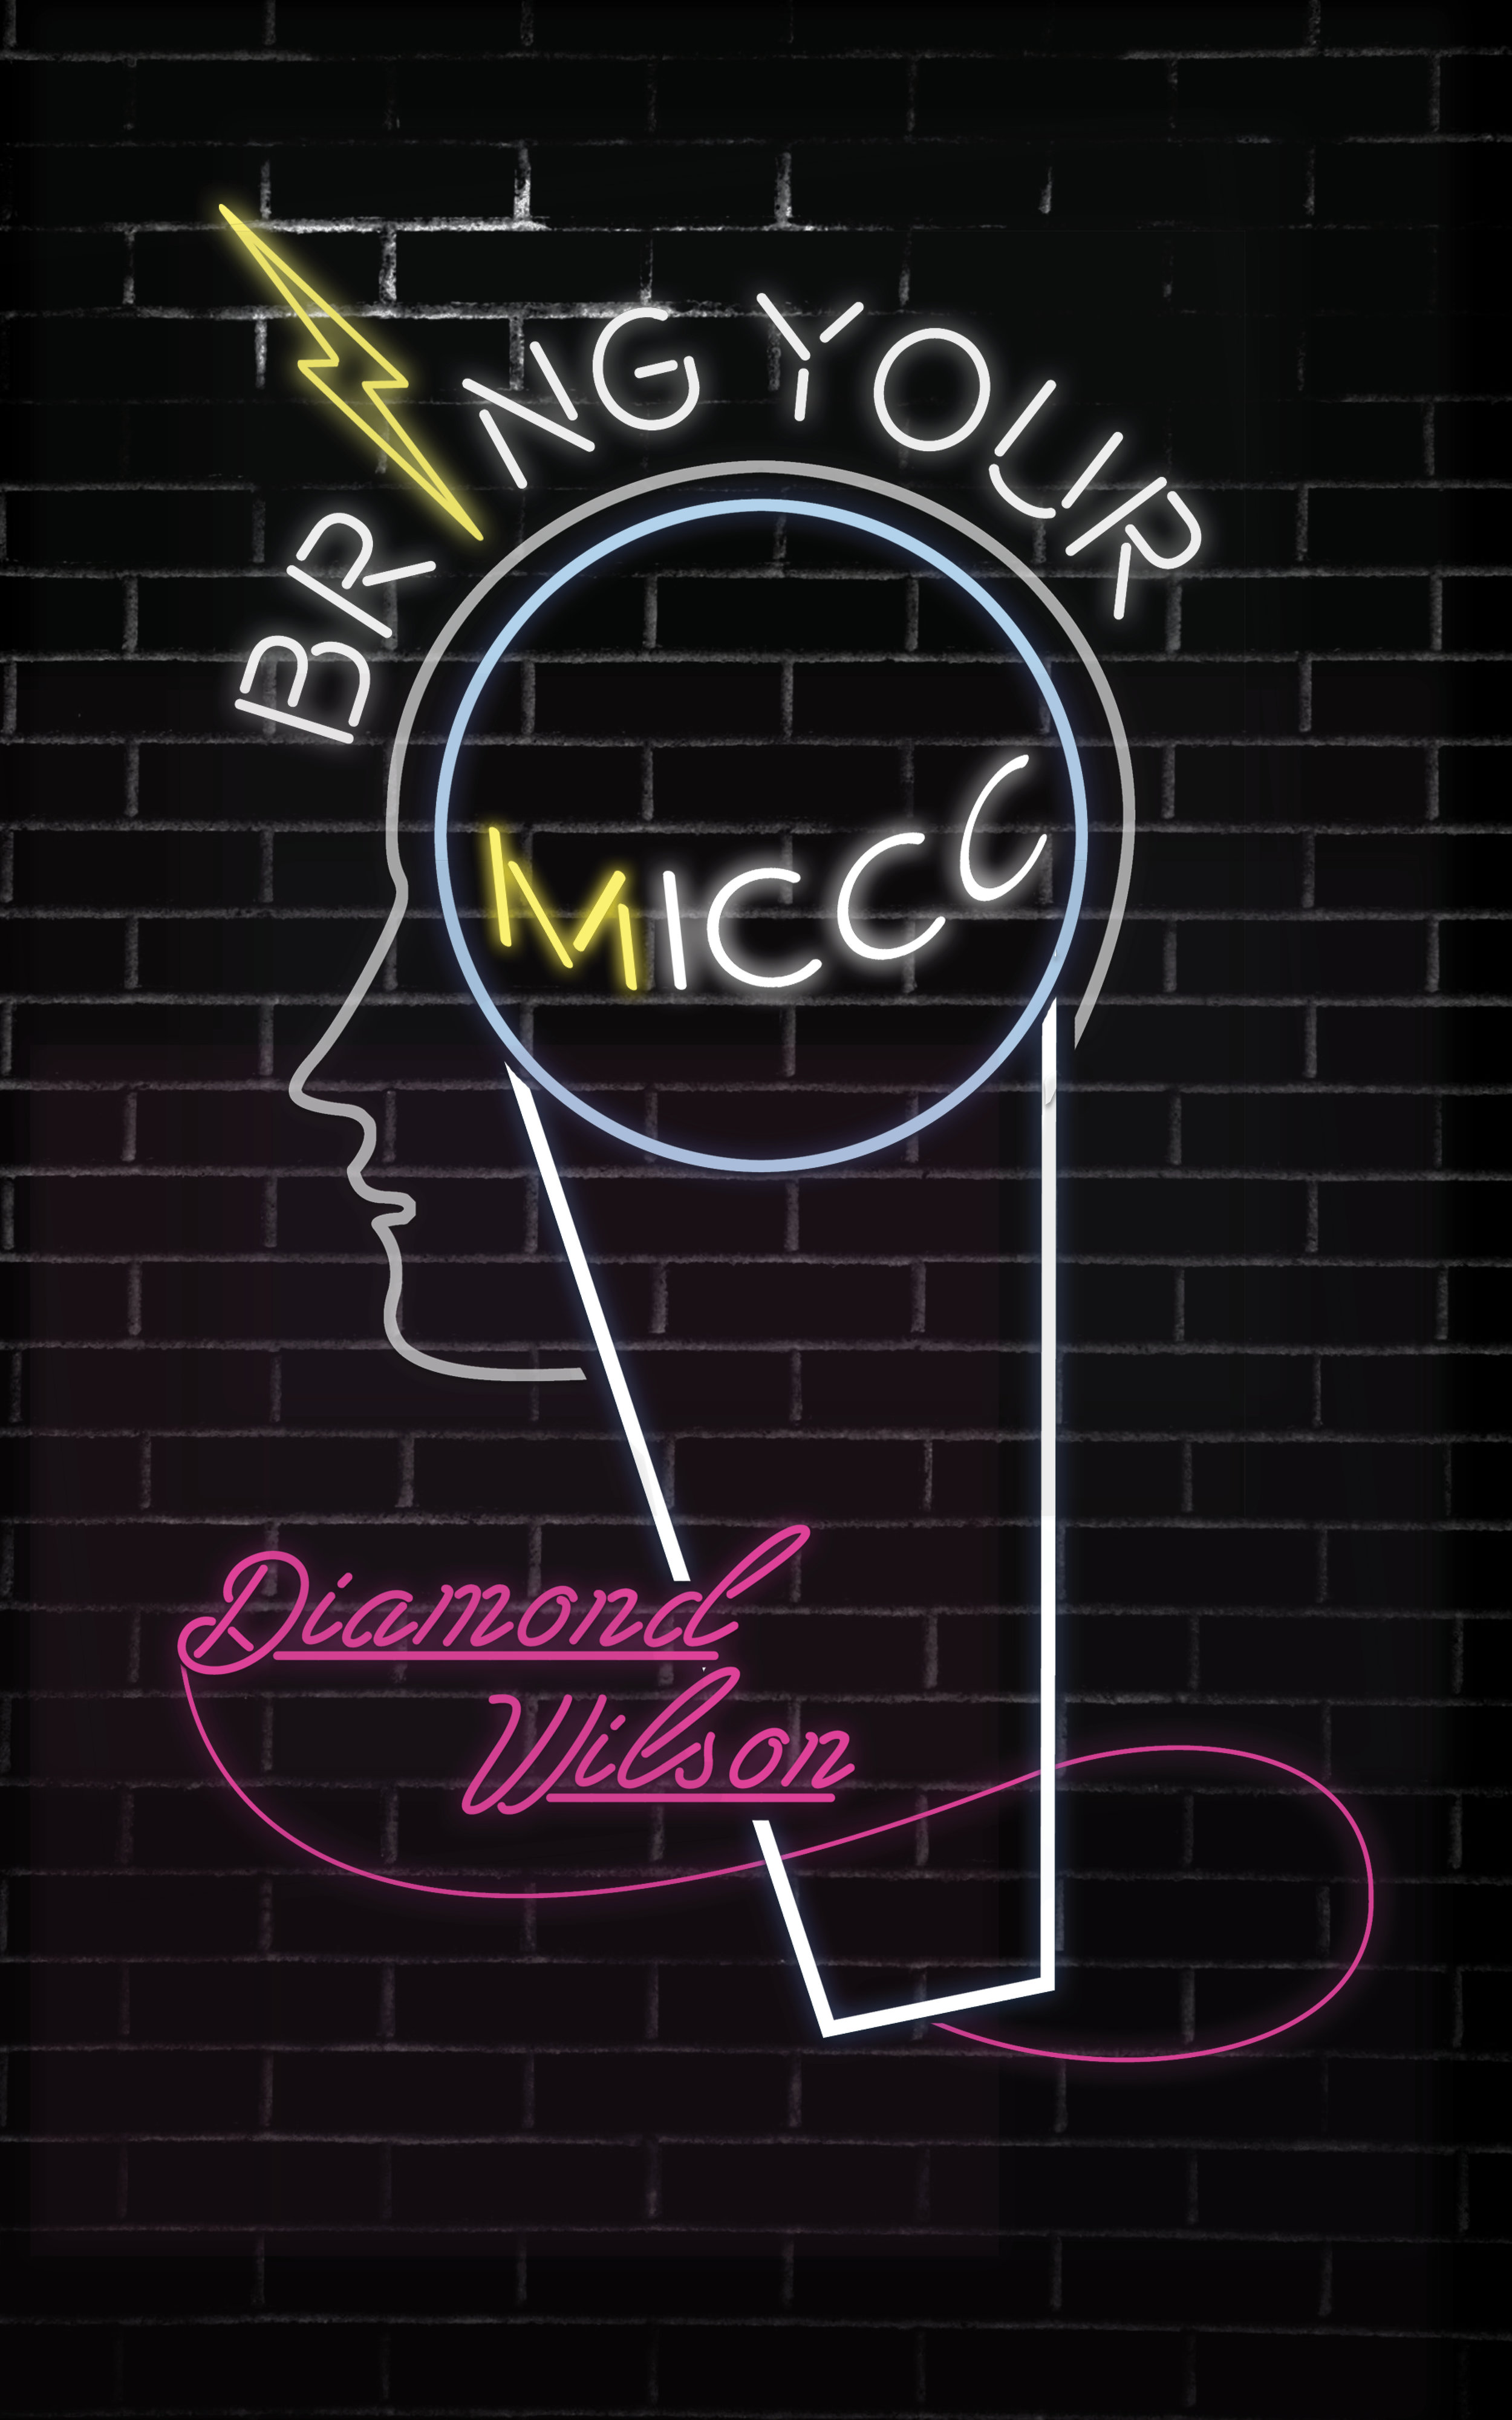 MICCC Cover front.jpeg